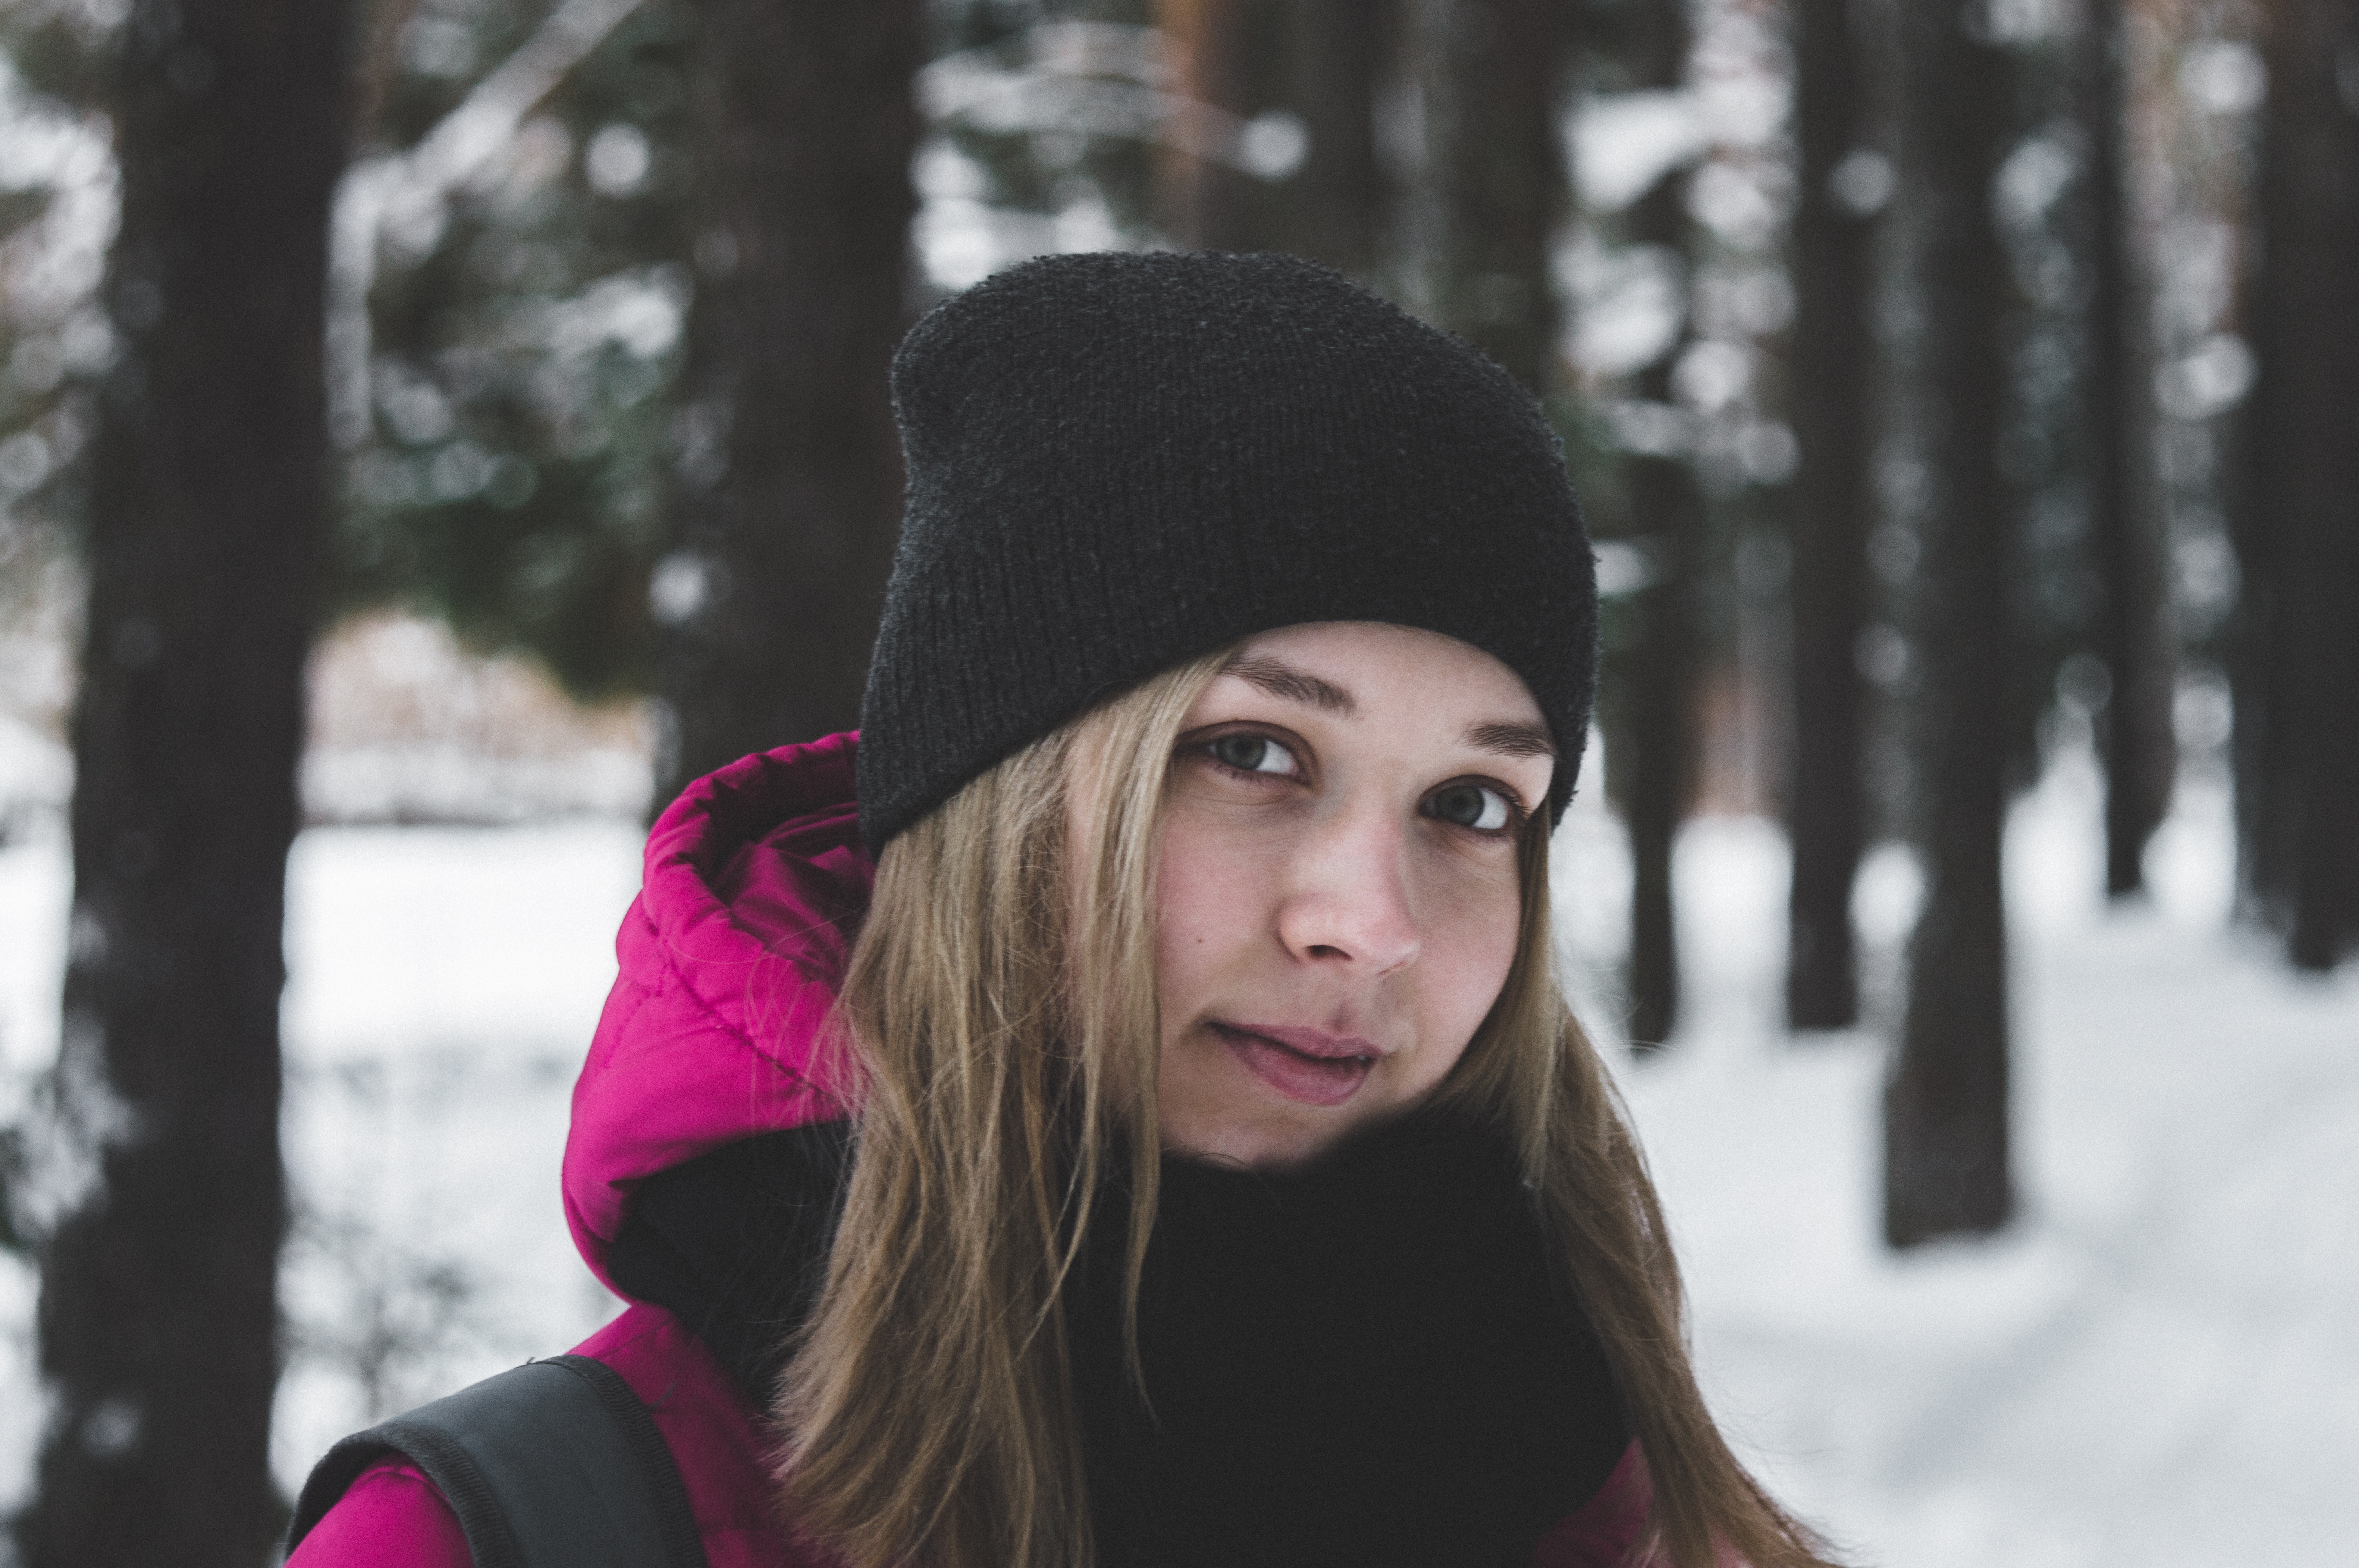 Woman in Pink and Black Jacket on White Snow, Adult, Outdoors, Woods, Woman, HQ Photo